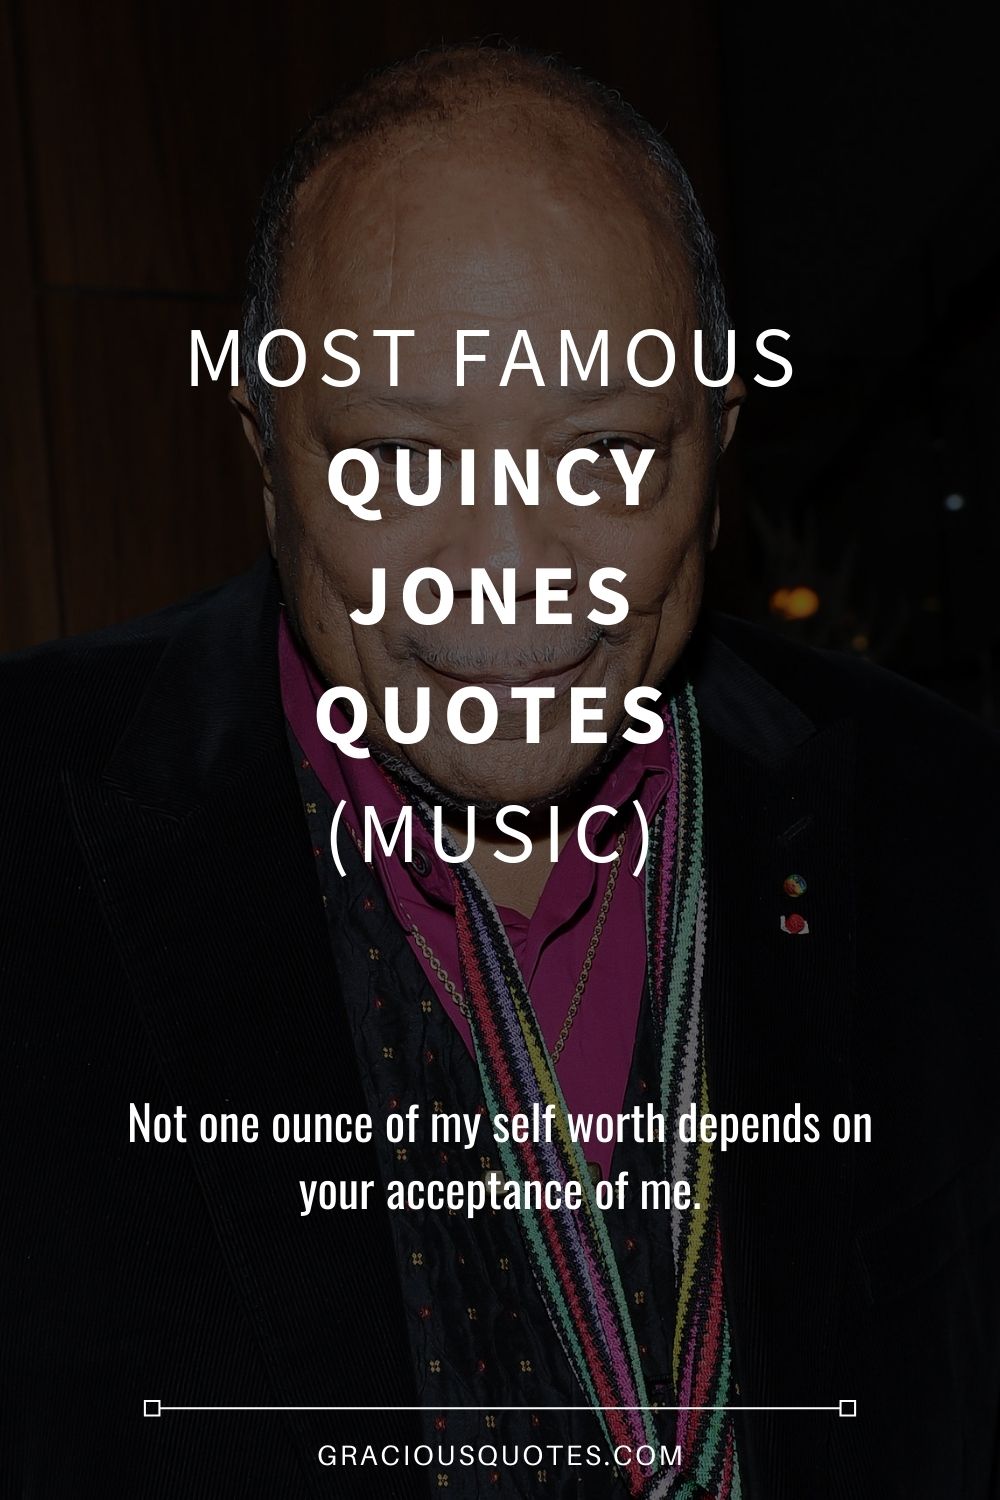 Most Famous Quincy Jones Quotes (MUSIC) - Gracious Quotes